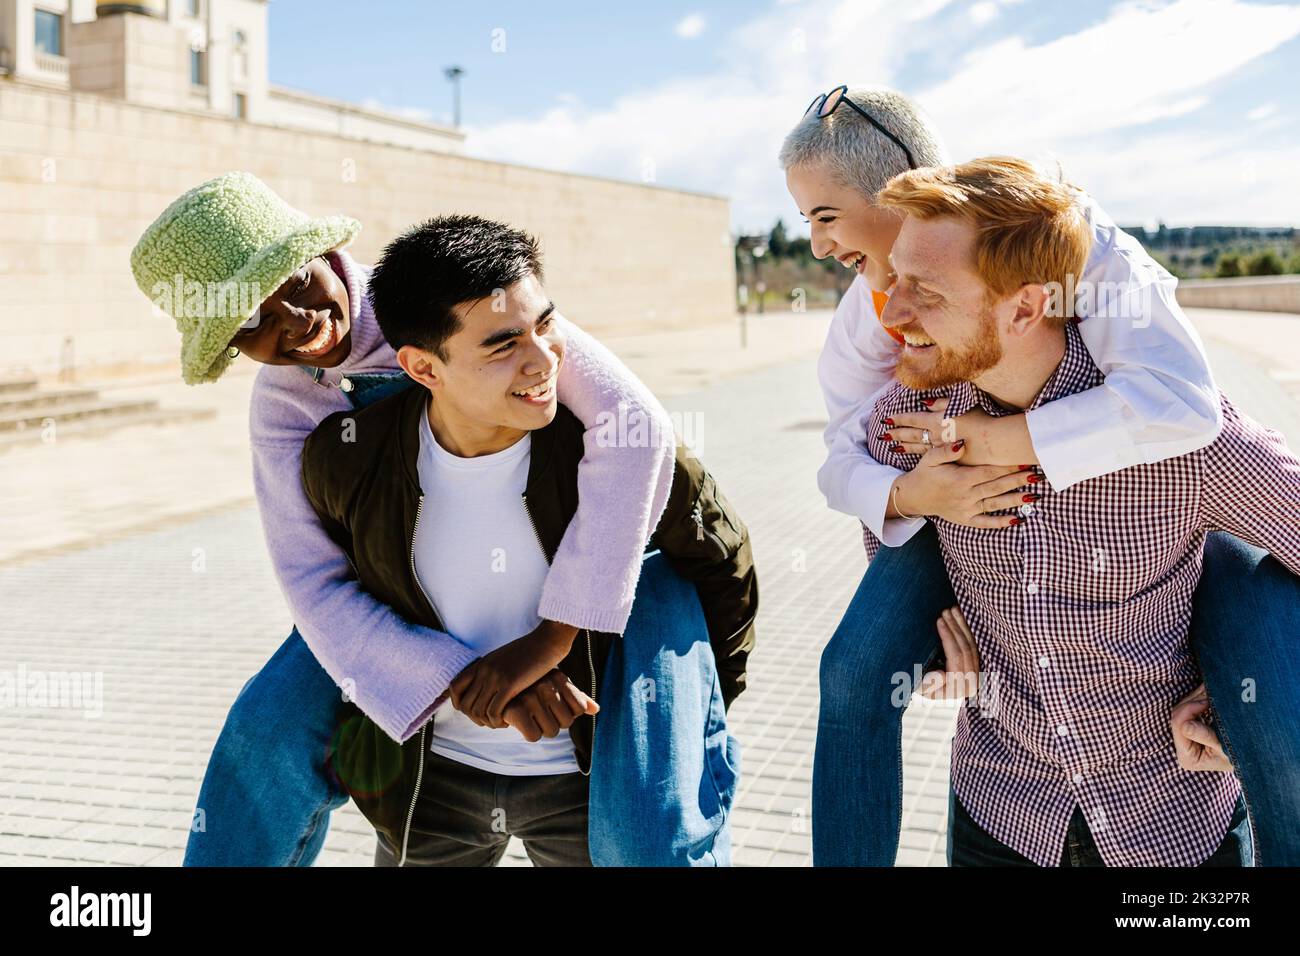 Multi ethnic group of happy young people having fun together Stock Photo